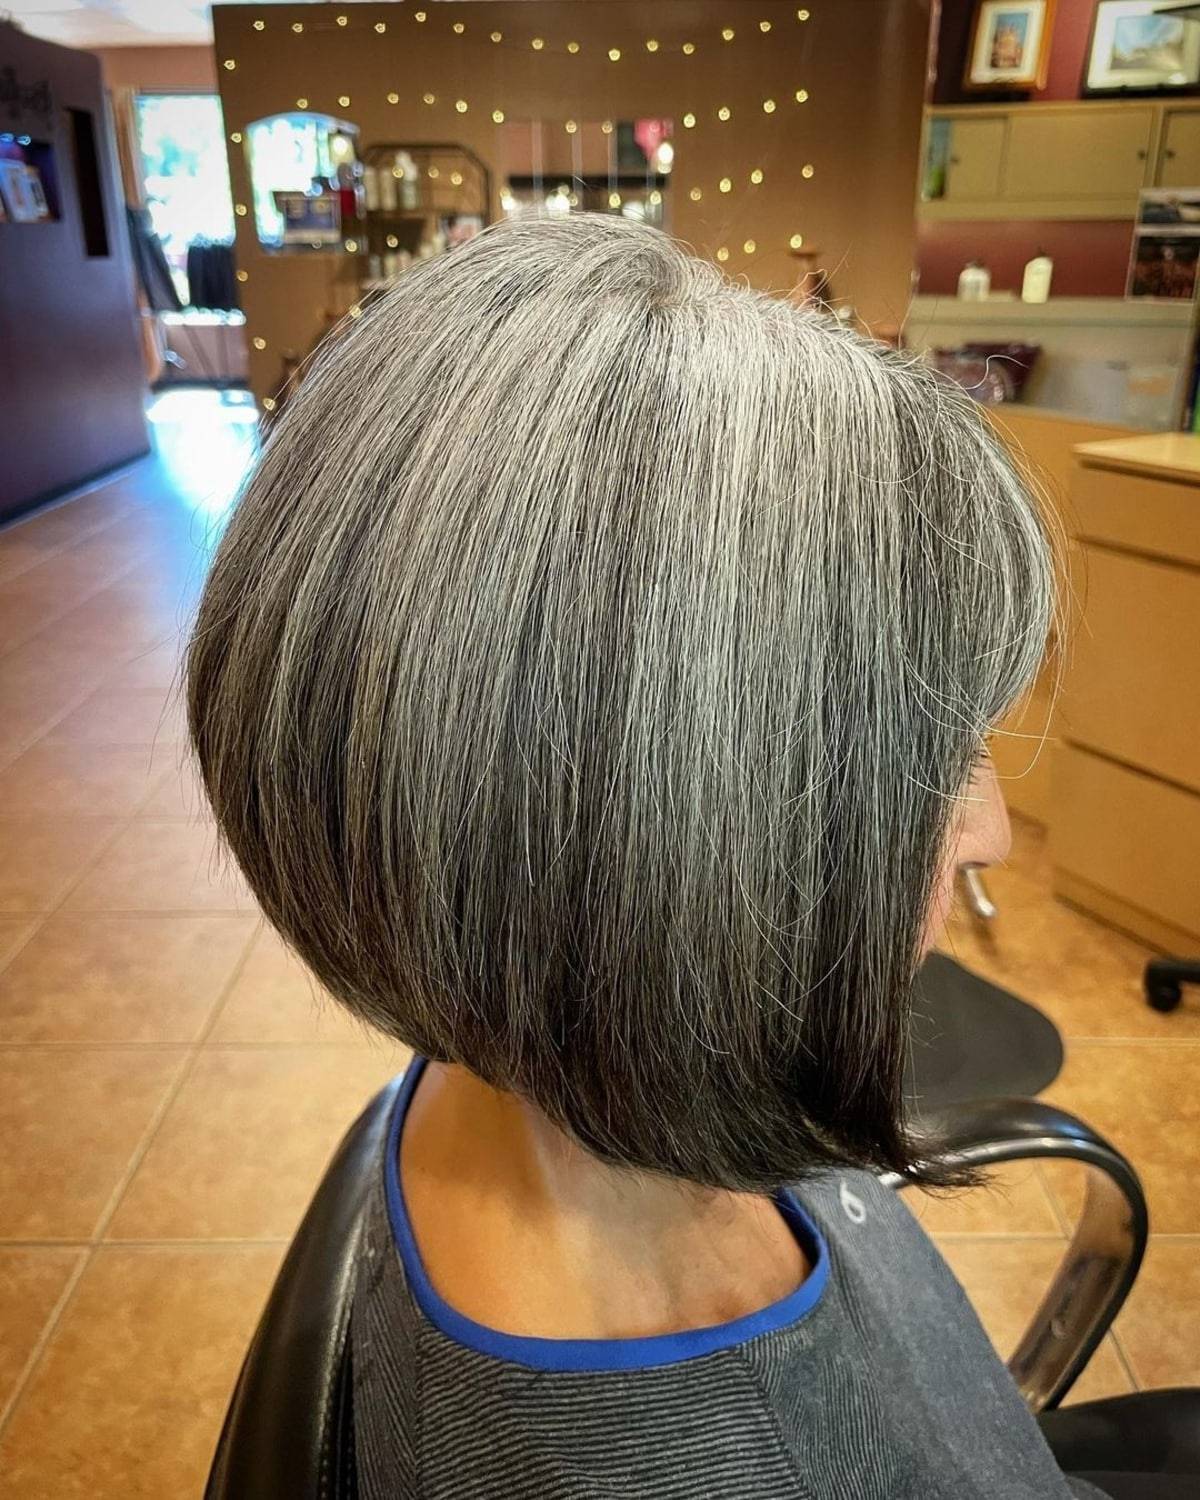 27 Gorgeous Short Bobs for Older Women with Style